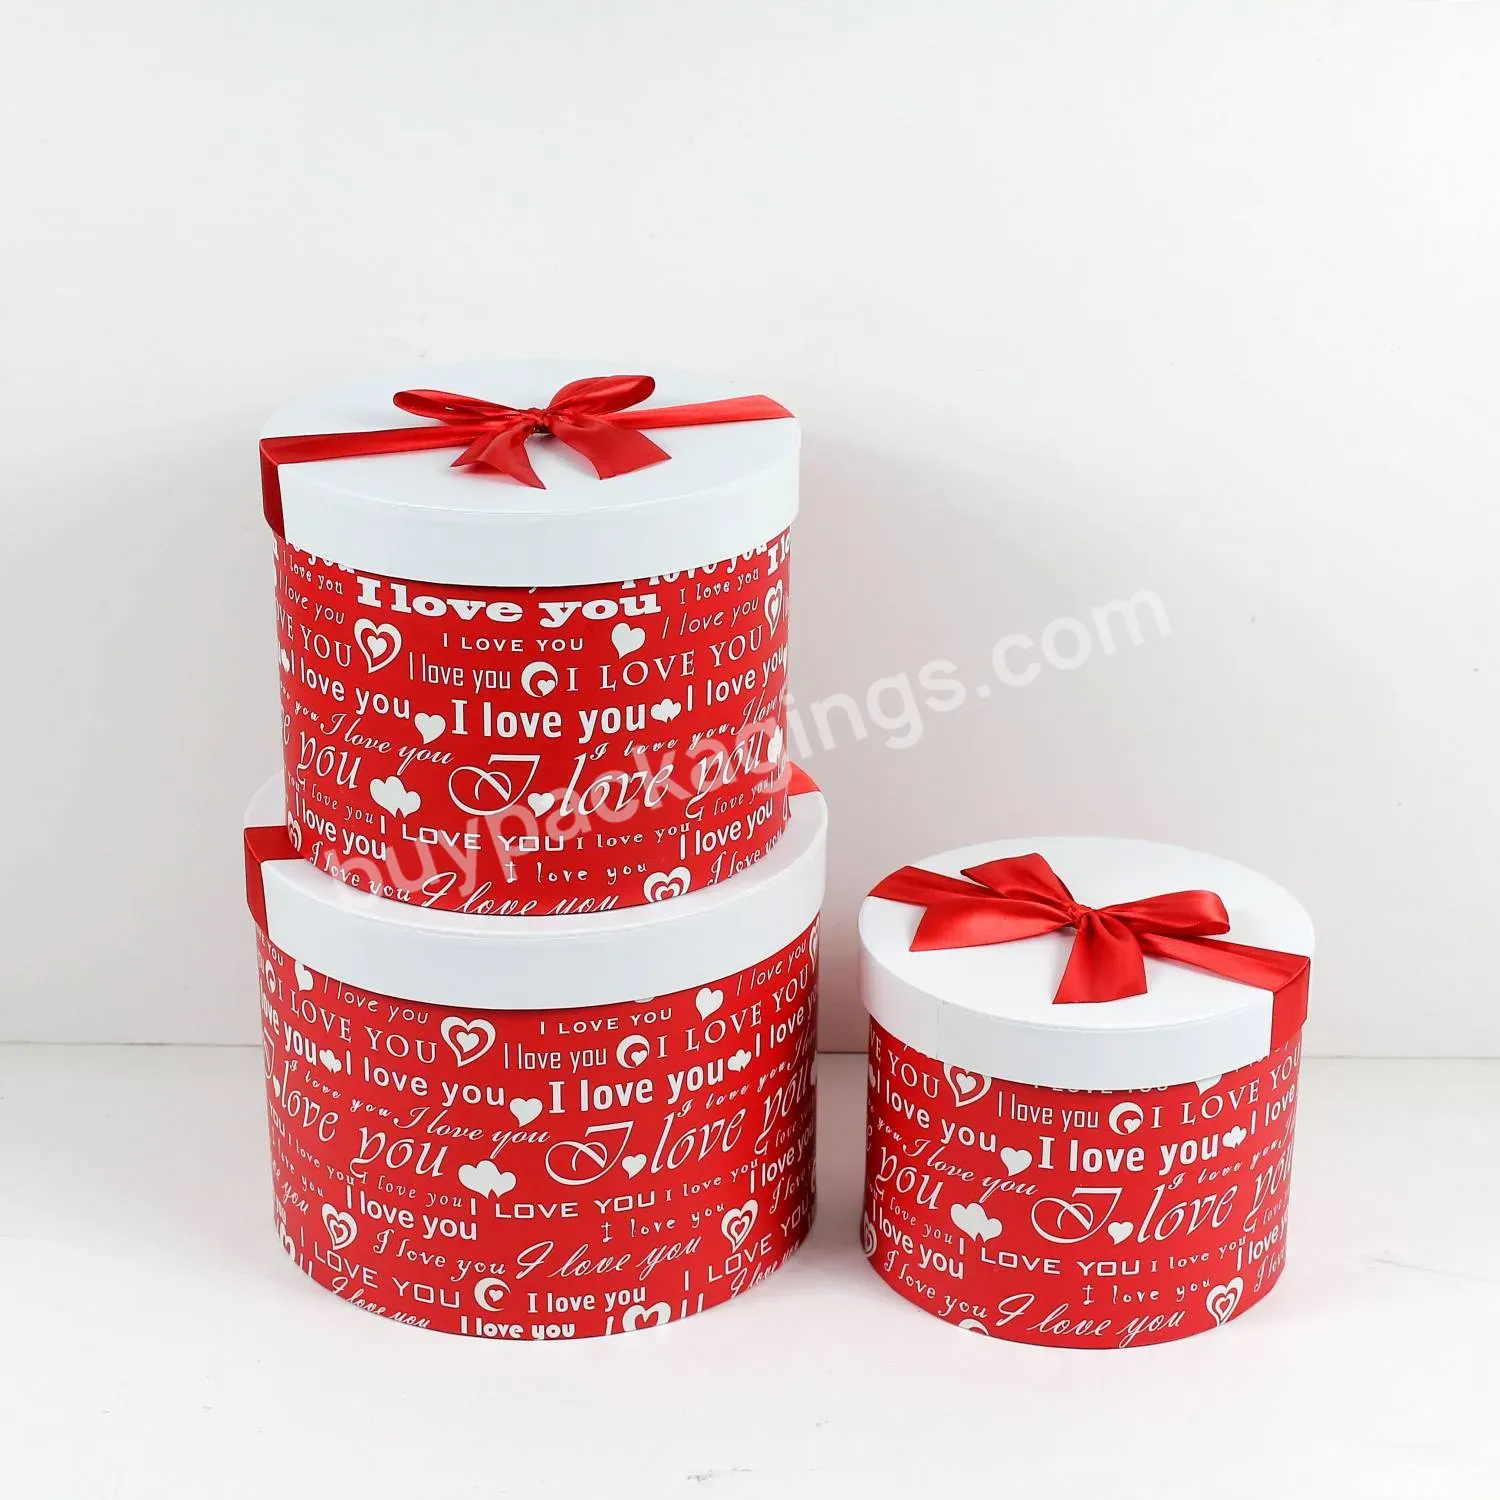 Luxury Cylindrical Rounded 3pcs/set Flowers Boxes Gift Paper Box With I Love You Printed - Buy Cylindrical Rounded 3pcs/set Paper Box,Flowers Boxes Gift Paper Box,Gift Paper Box With I Love You Printed.